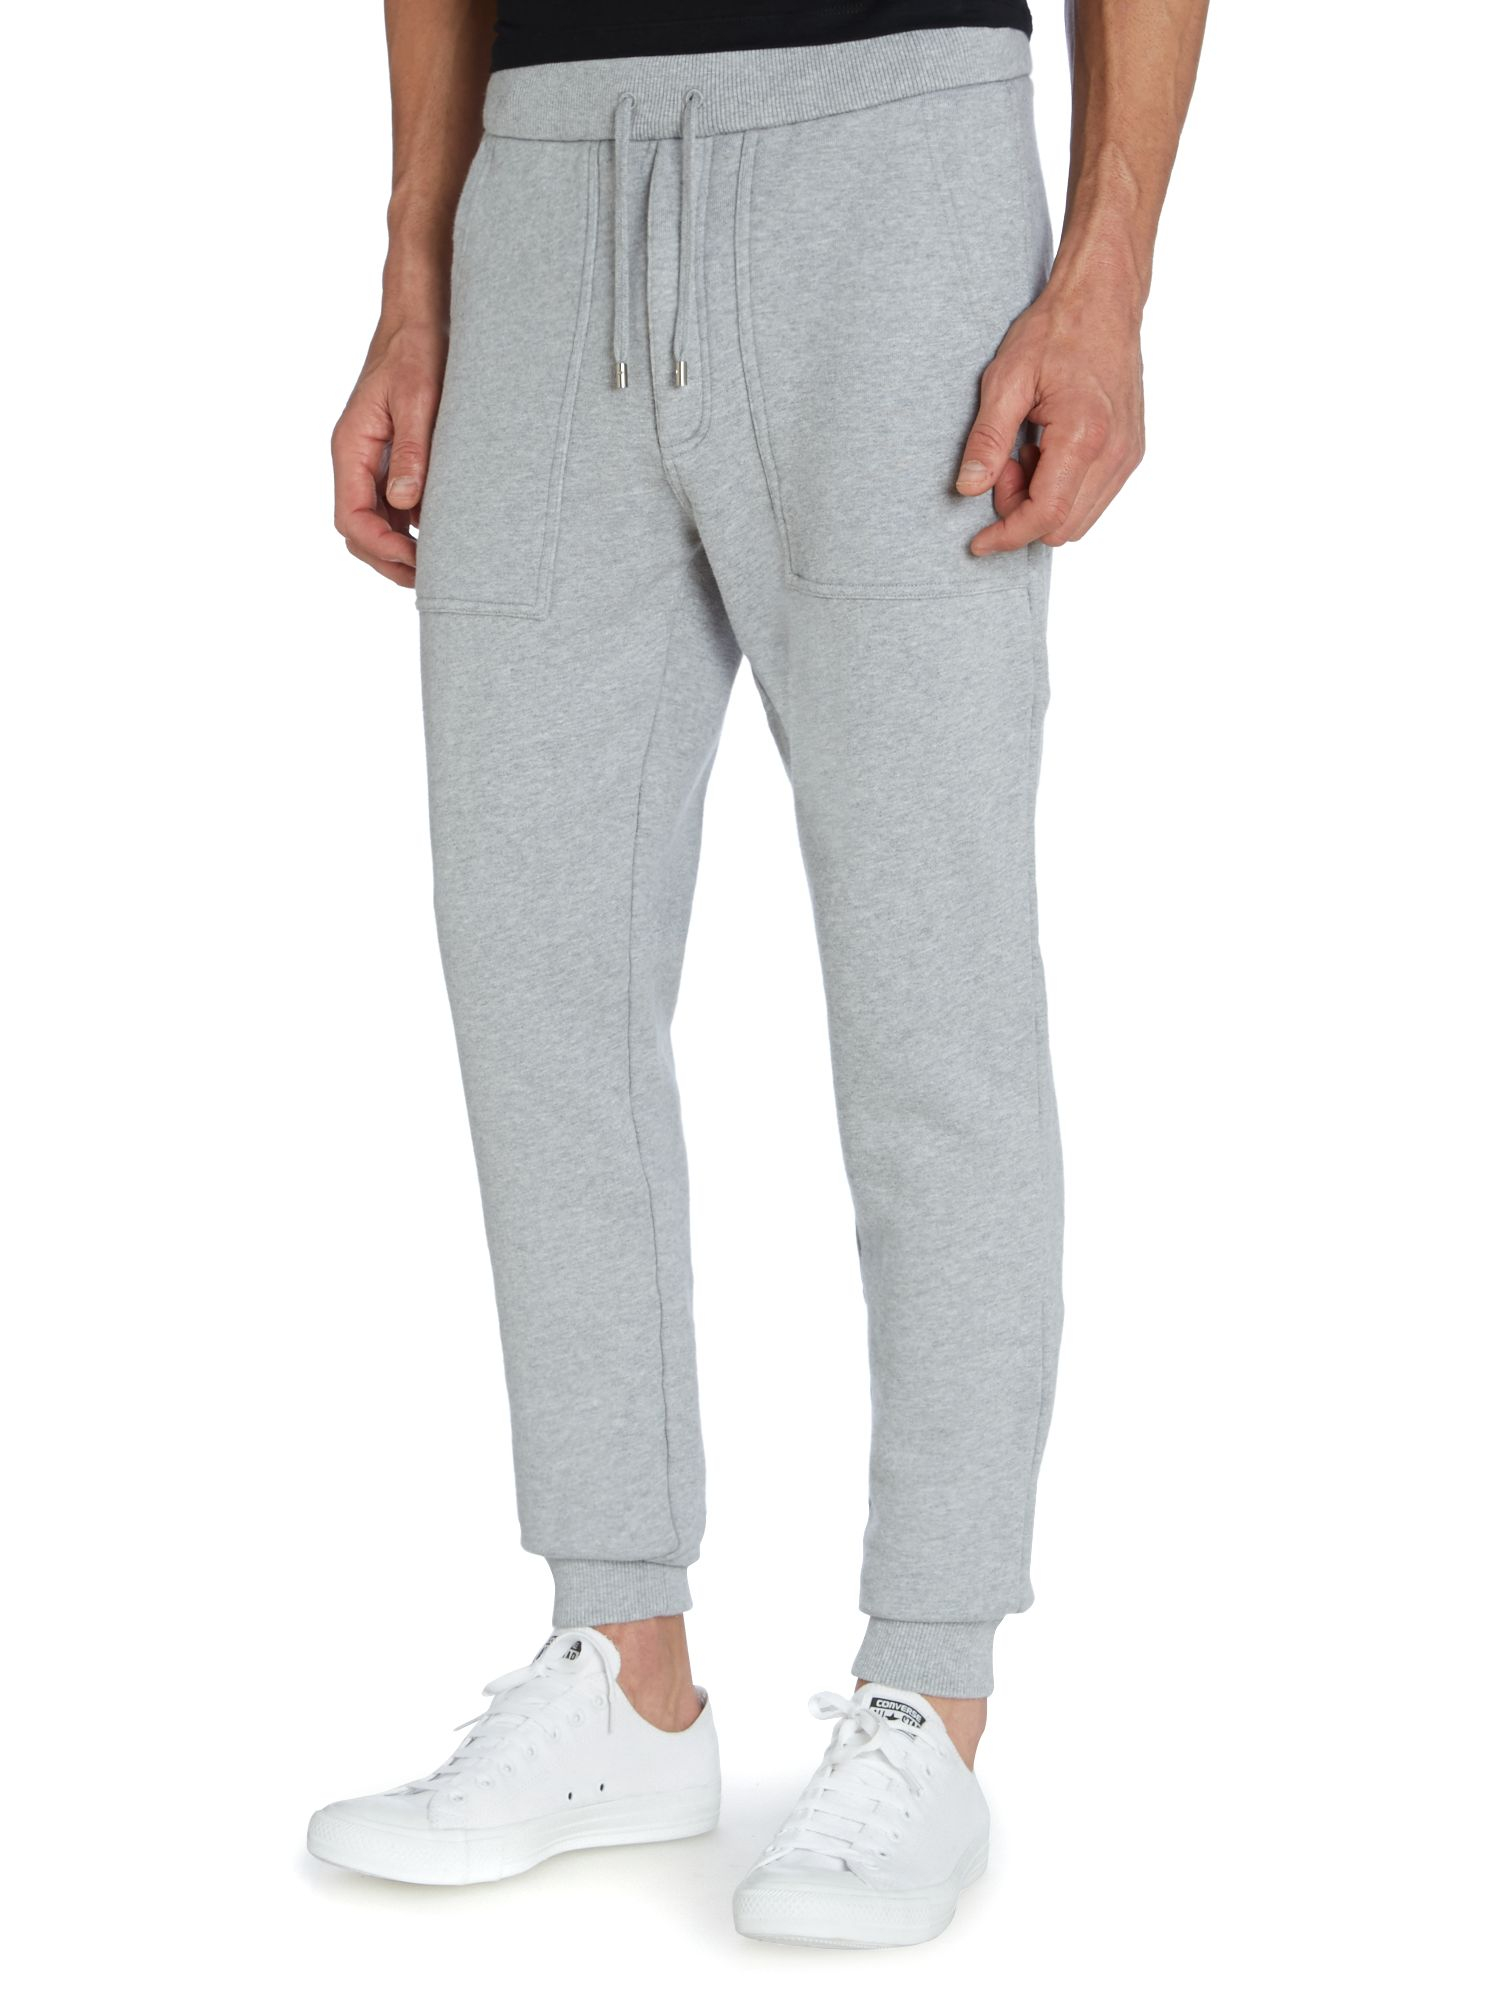 Michael kors Overdyed Sweat Pants in Gray for Men (Grey Marl) - Save 61 ...